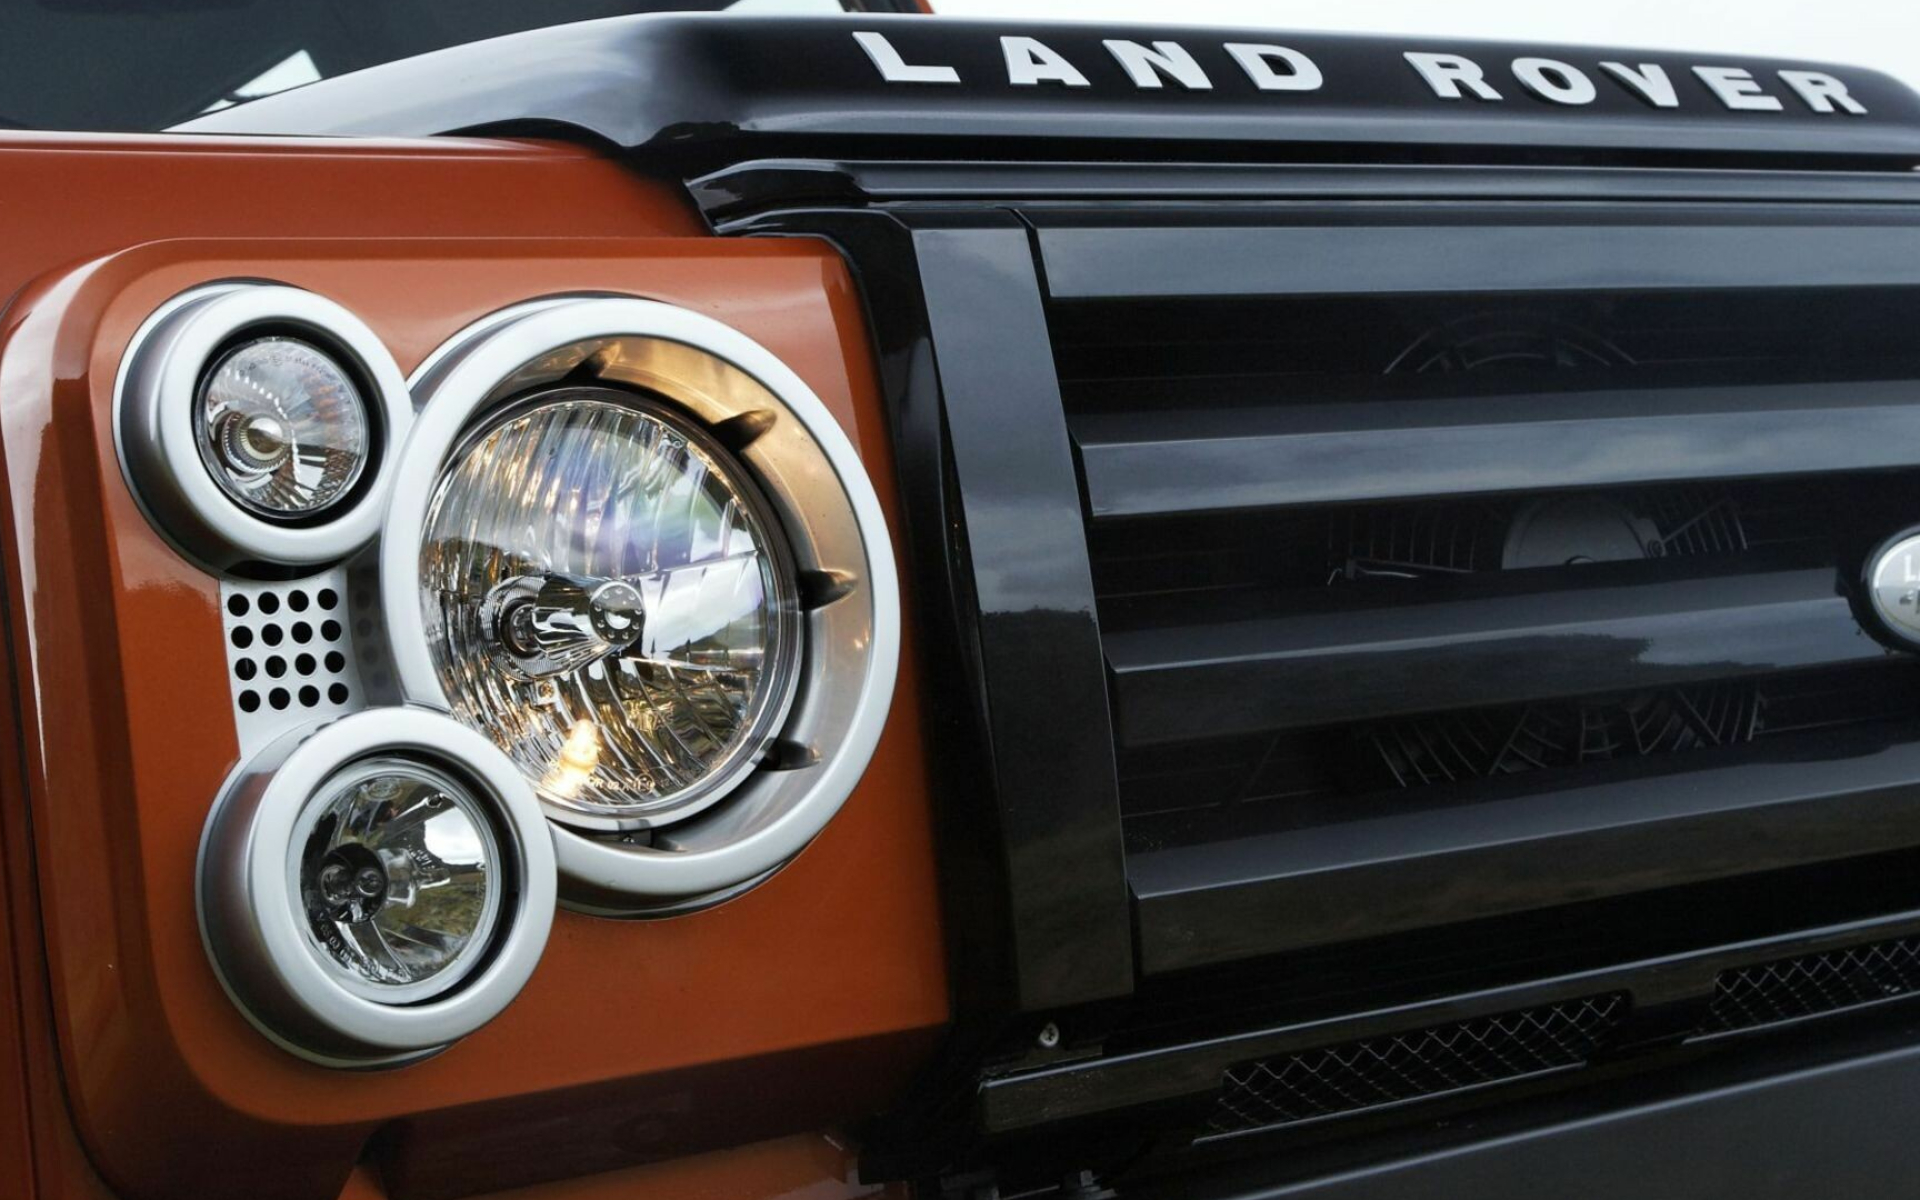 Land Rover: Defender, The Freelander model was Introduced in 1997. 1920x1200 HD Wallpaper.